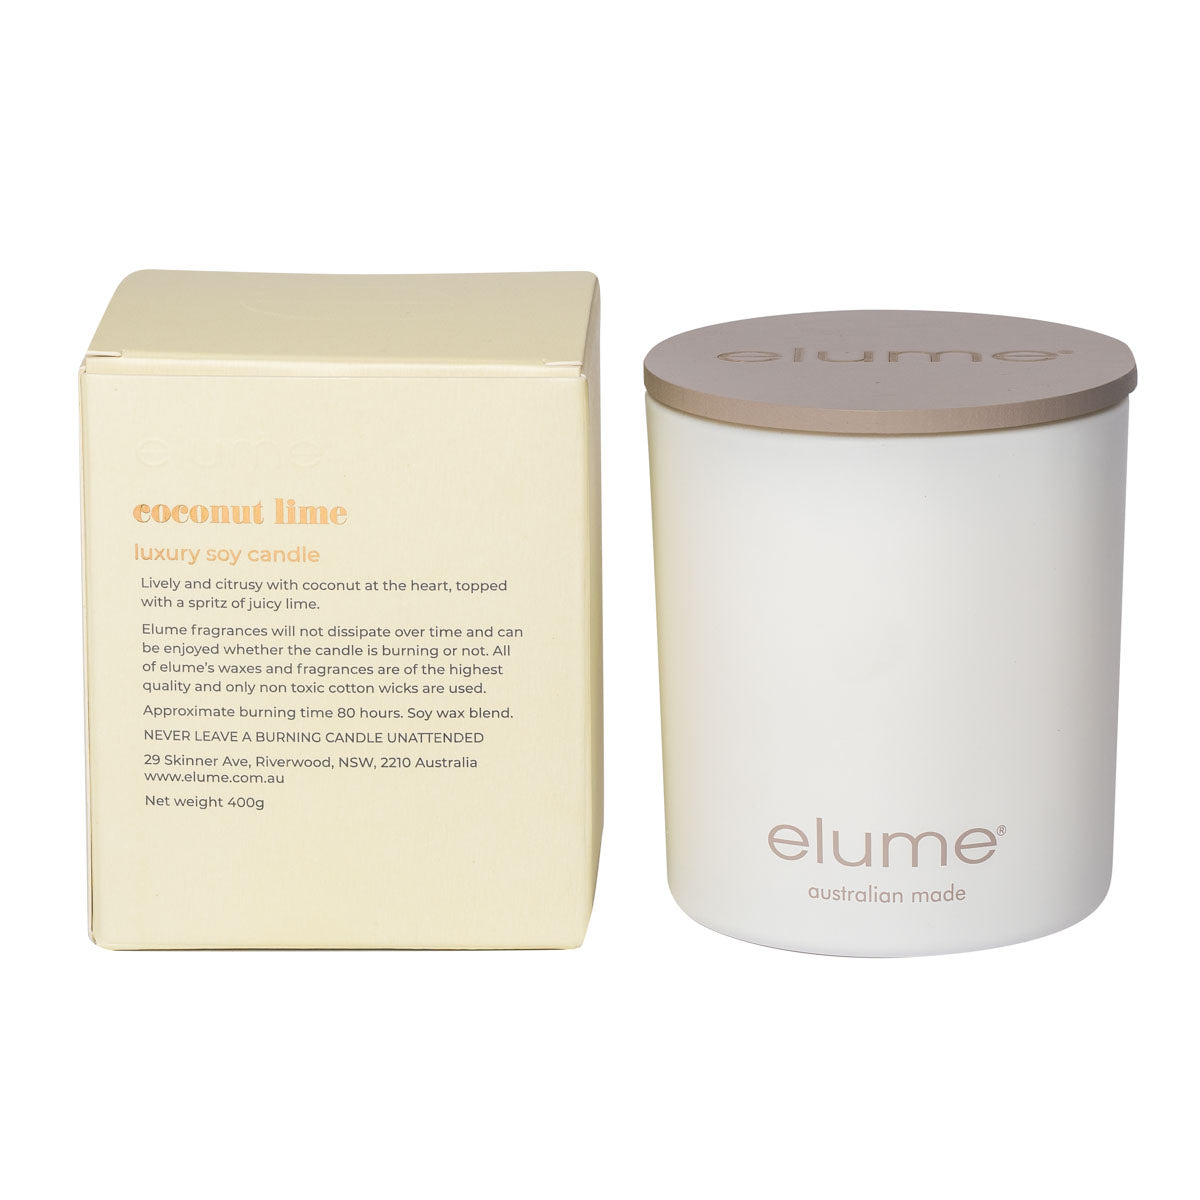 Coconut Lime : Elume Luxury Soy Candle